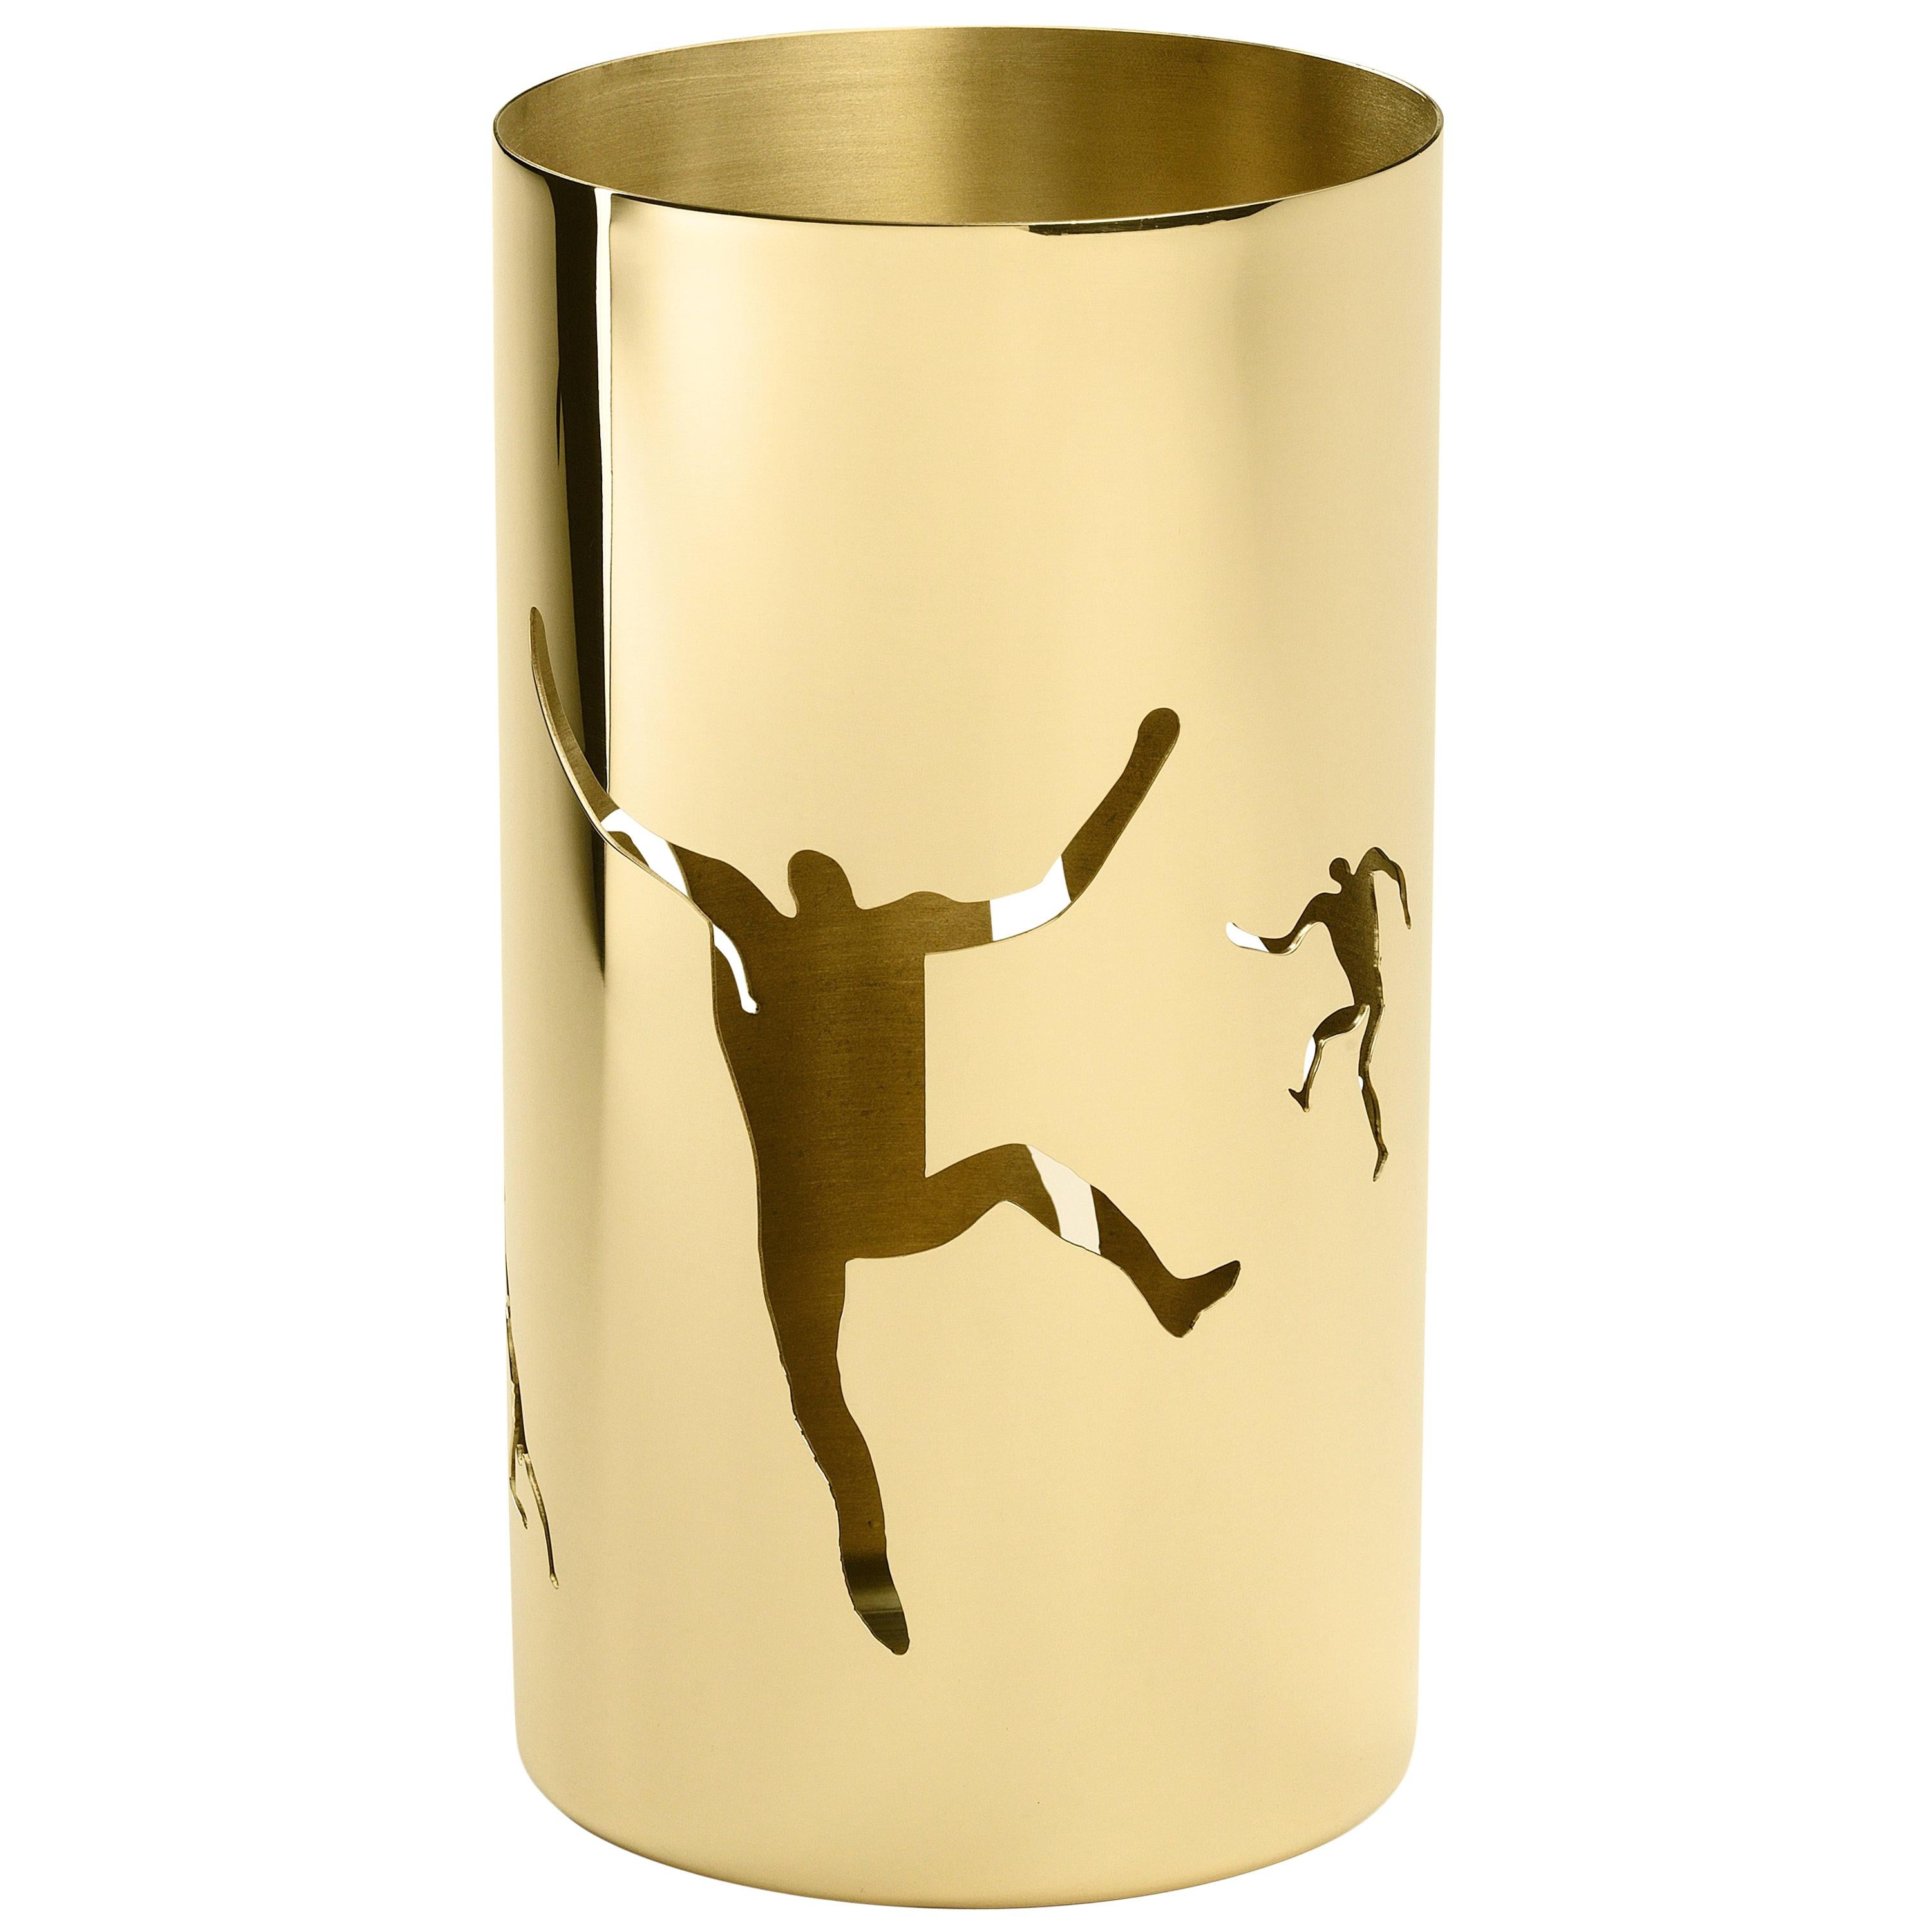 Cylinder Bowl in Polished Brass by Andrea Branzi For Sale